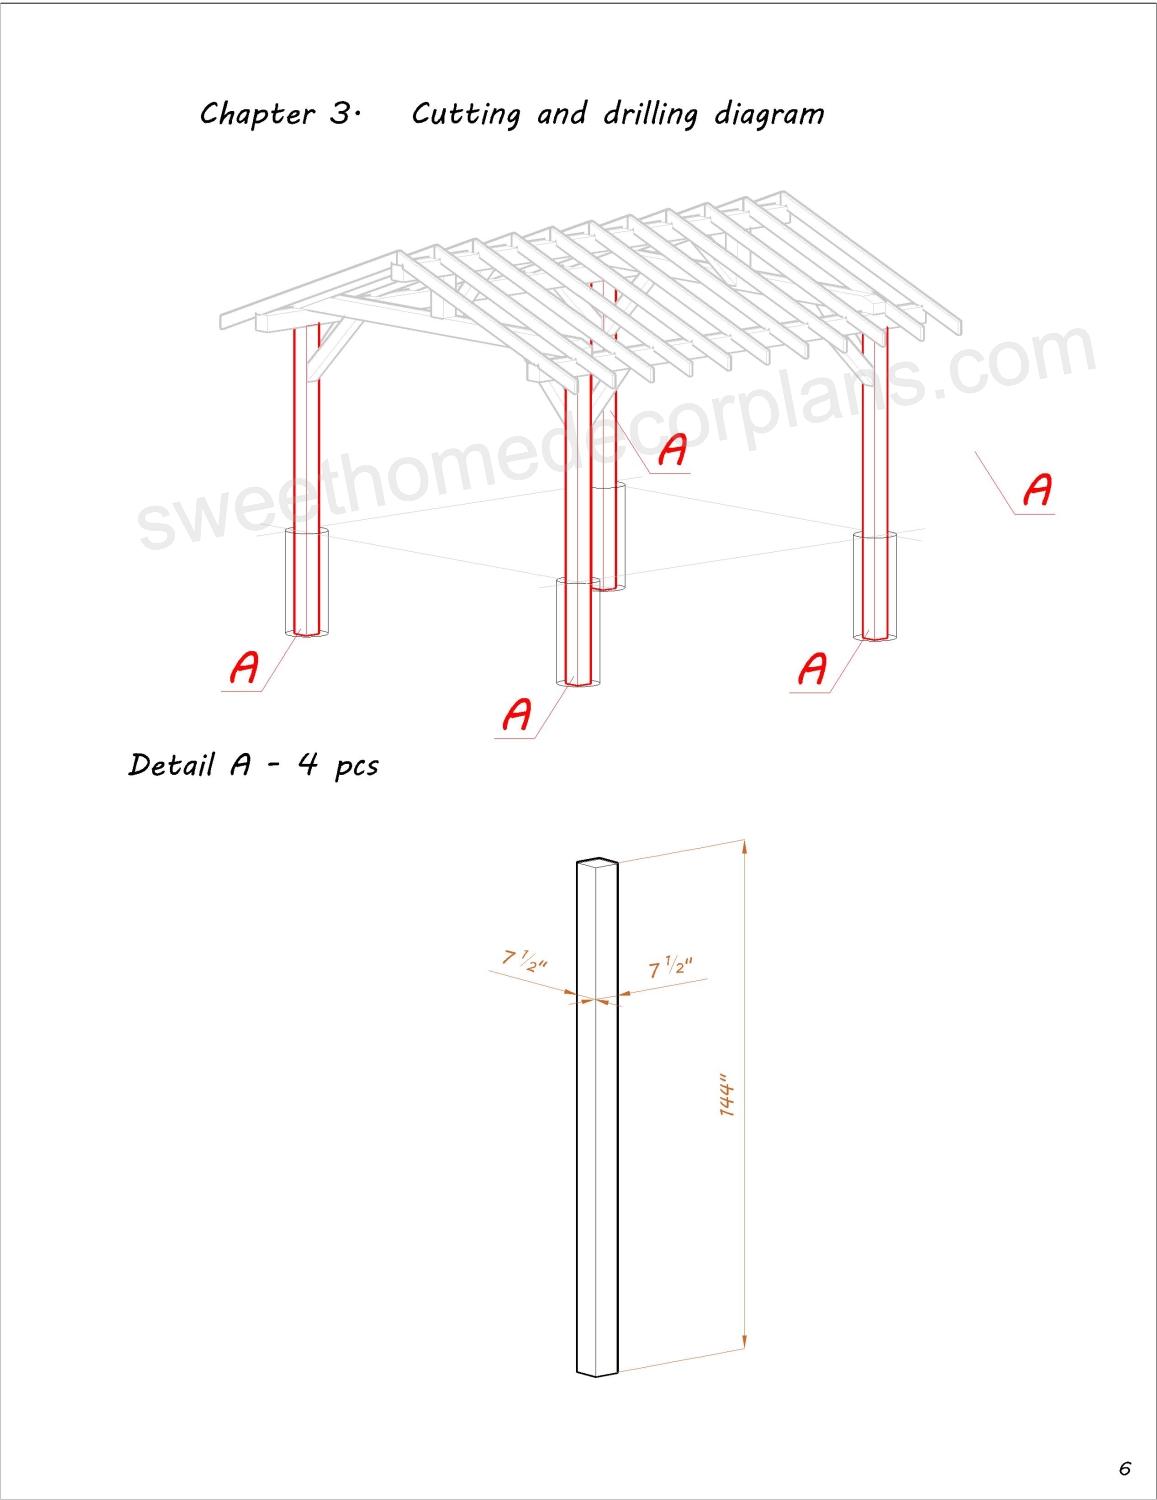 cutting-and-drilling-diagram-16-х-16-gable-pavilion-plans-in-pdf